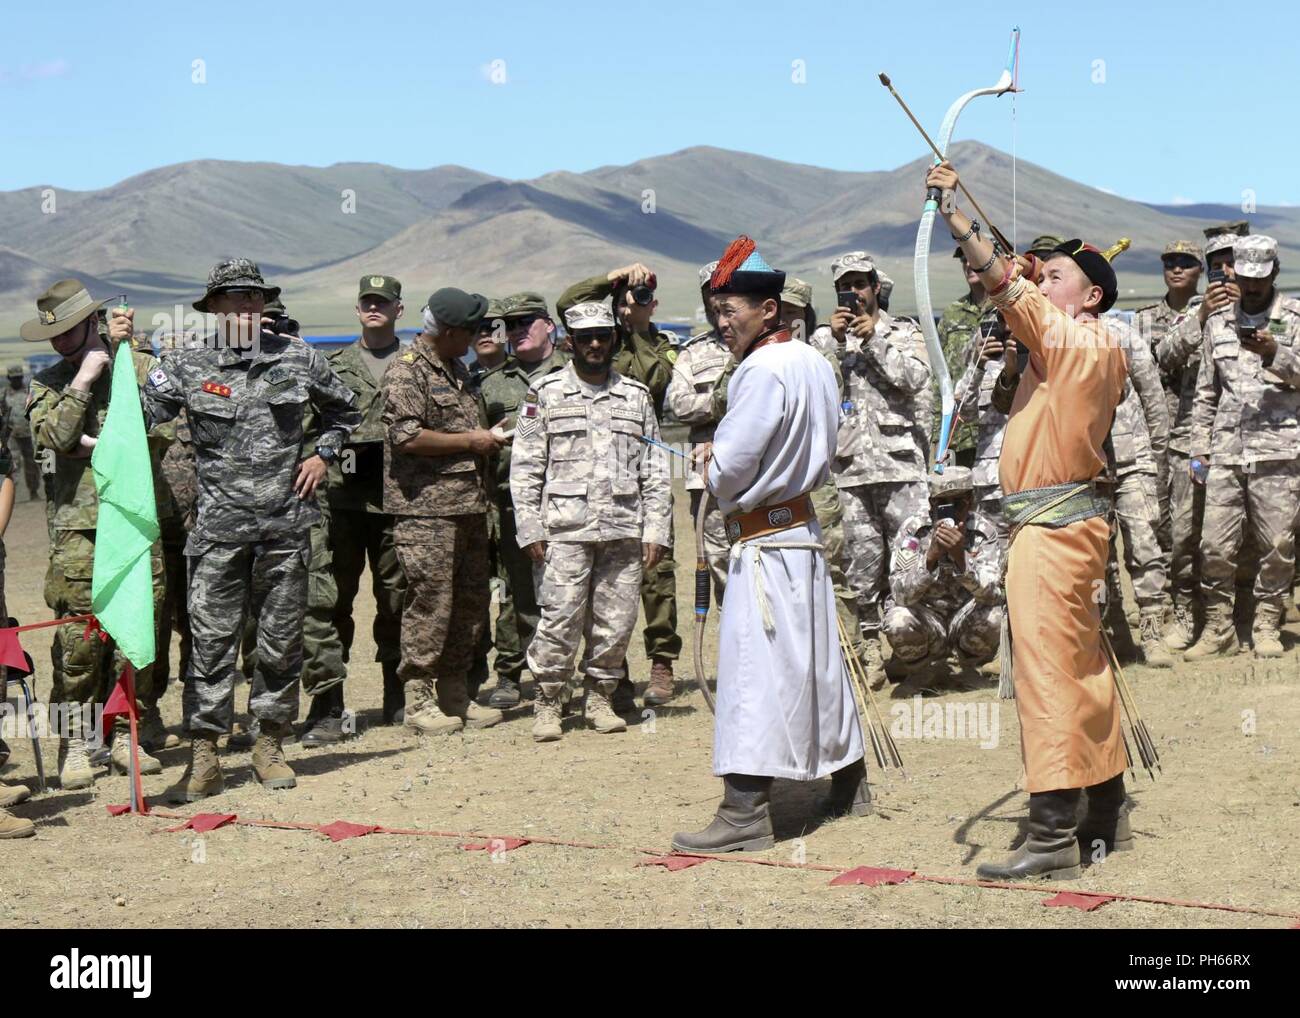 Traditional Mongolian archers shoot at a target during the Nadaam Festival as part of Khaan Quest 2018 at Five Hills Training Area, Mongolia, June 27.  KQ18 is a regularly scheduled, multinational exercise co-sponsored by U.S. Pacific Command and hosted annually by the Mongolian Armed Forces.  This exercise is the latest in a continuing series of exercises designed to promote regional peace and security.  This year's exercise marks the 16th anniversary of this training event. Stock Photo